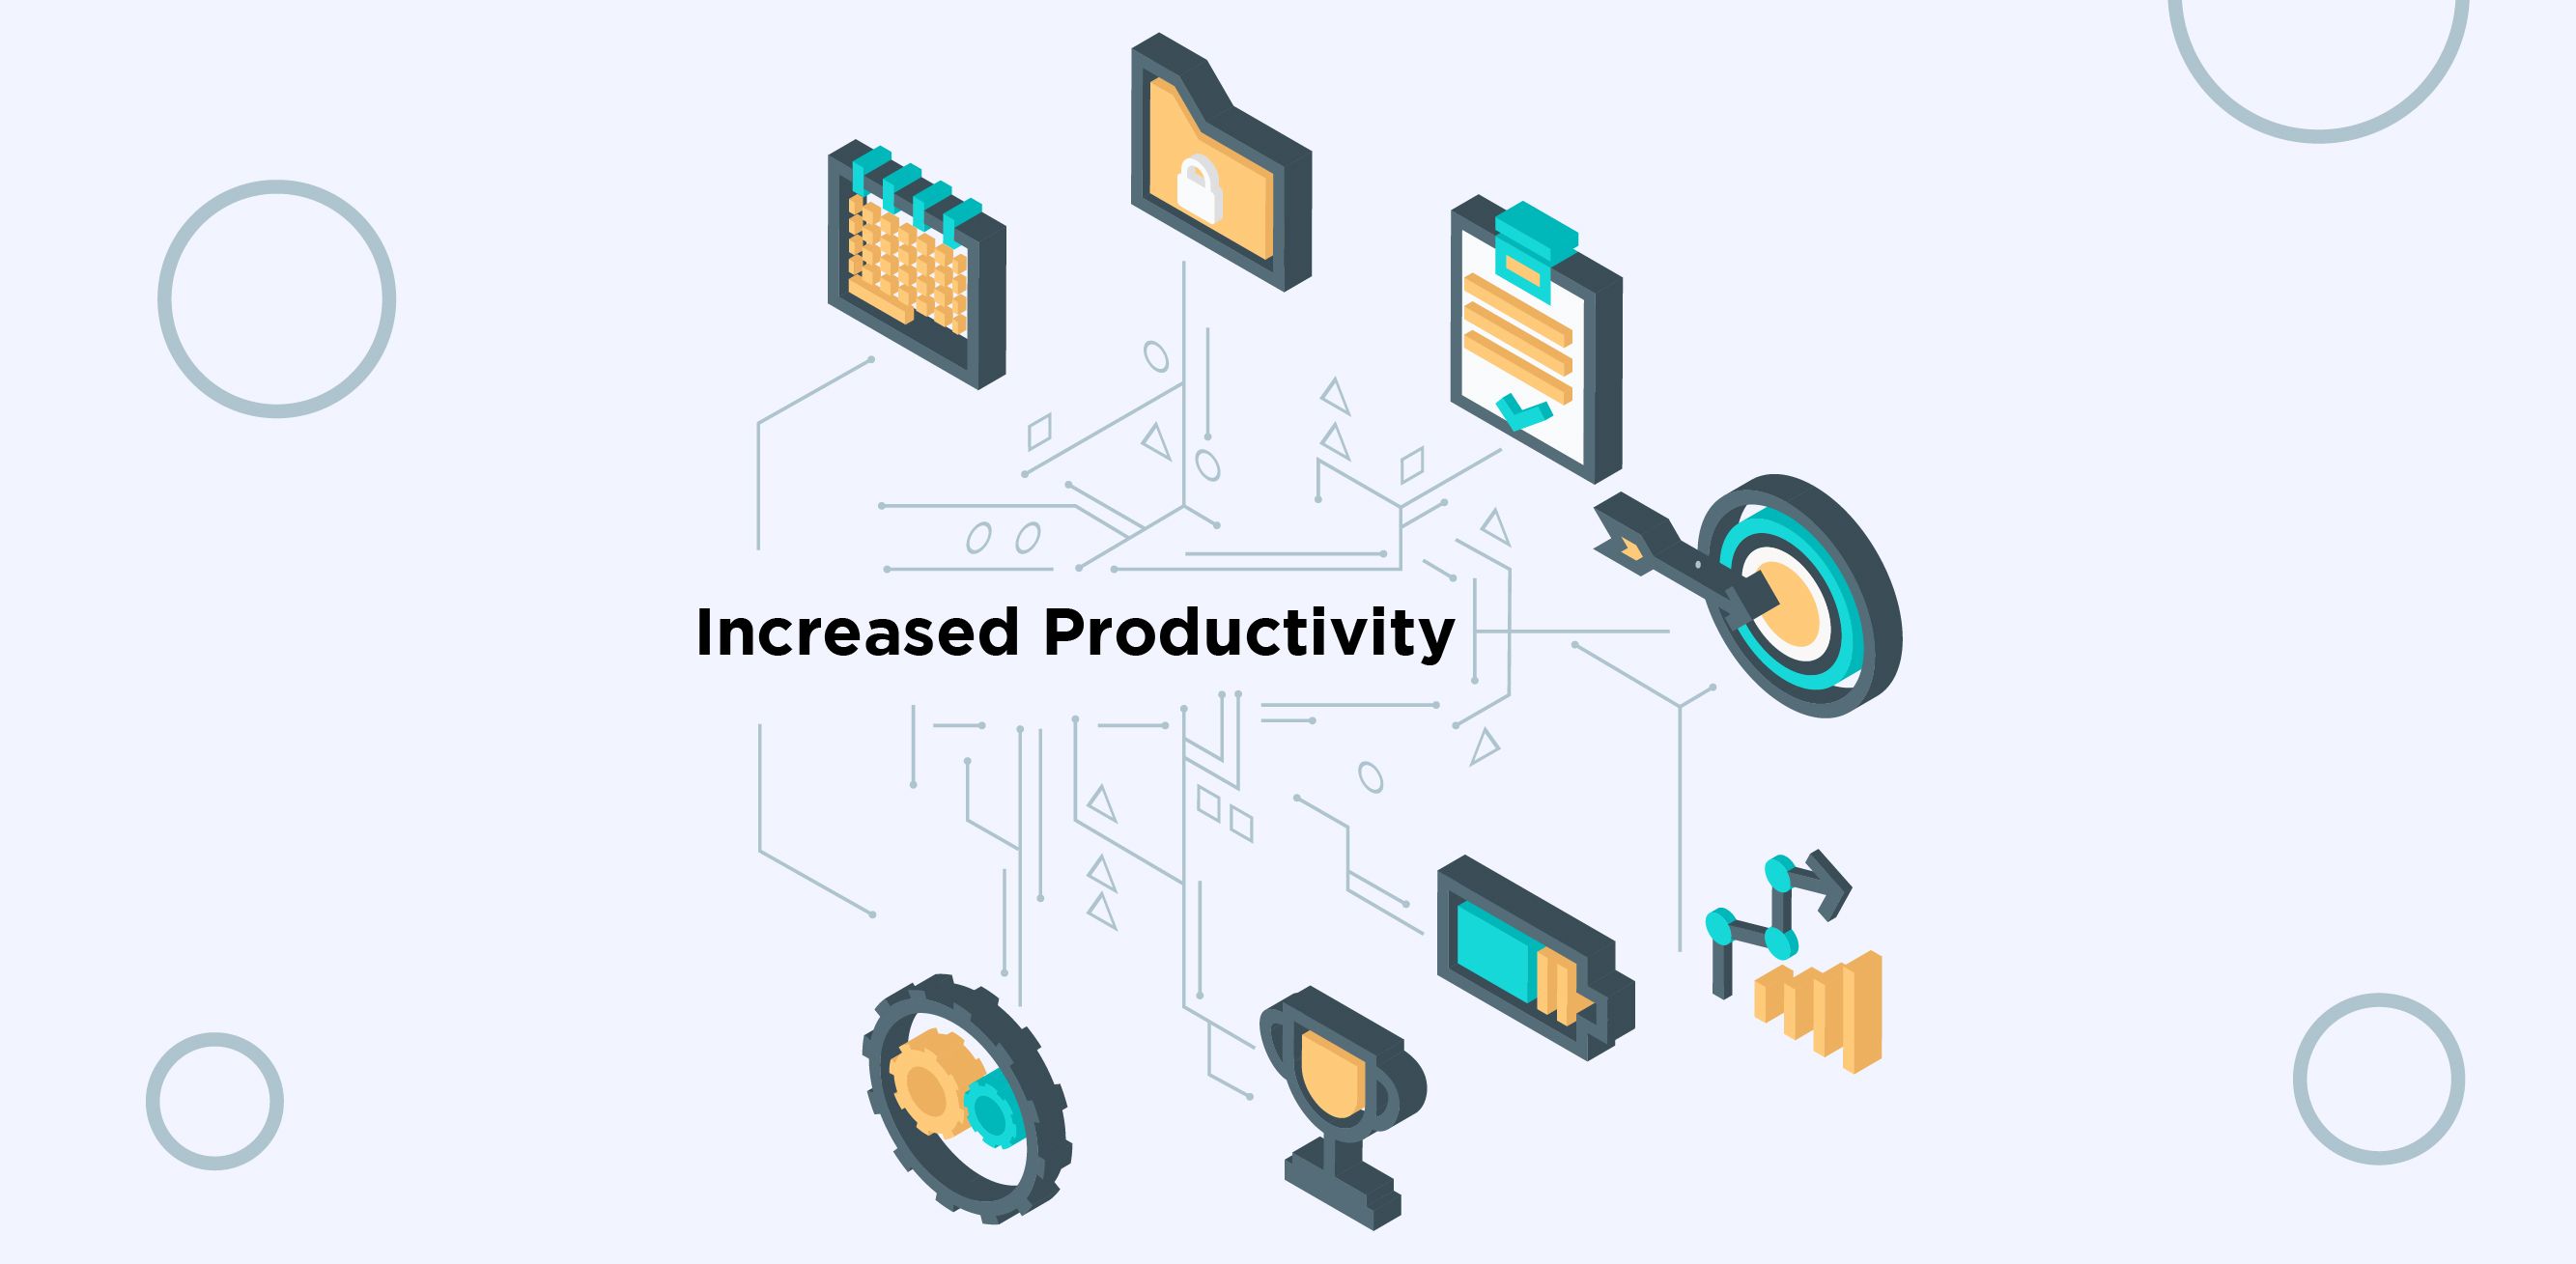  Increased Productivity